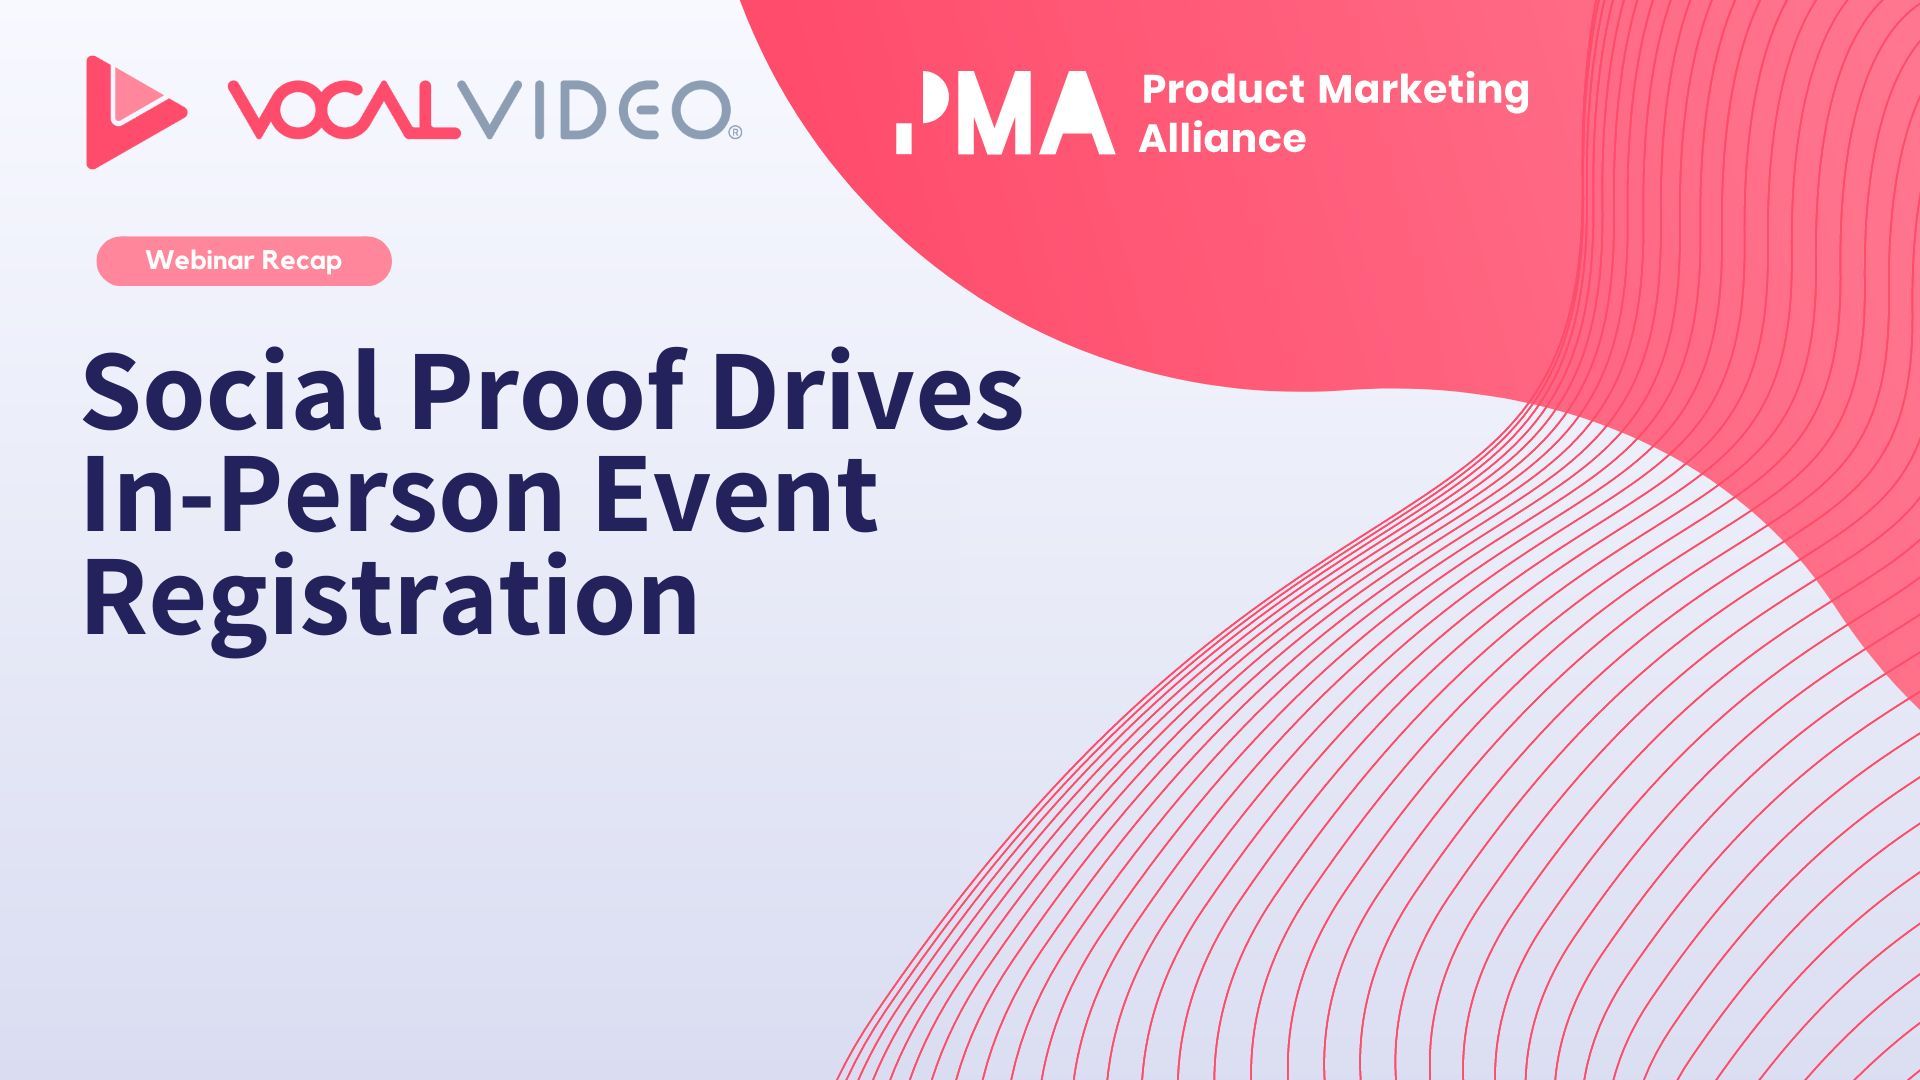 Social Proof Drives In-Person Event Registration